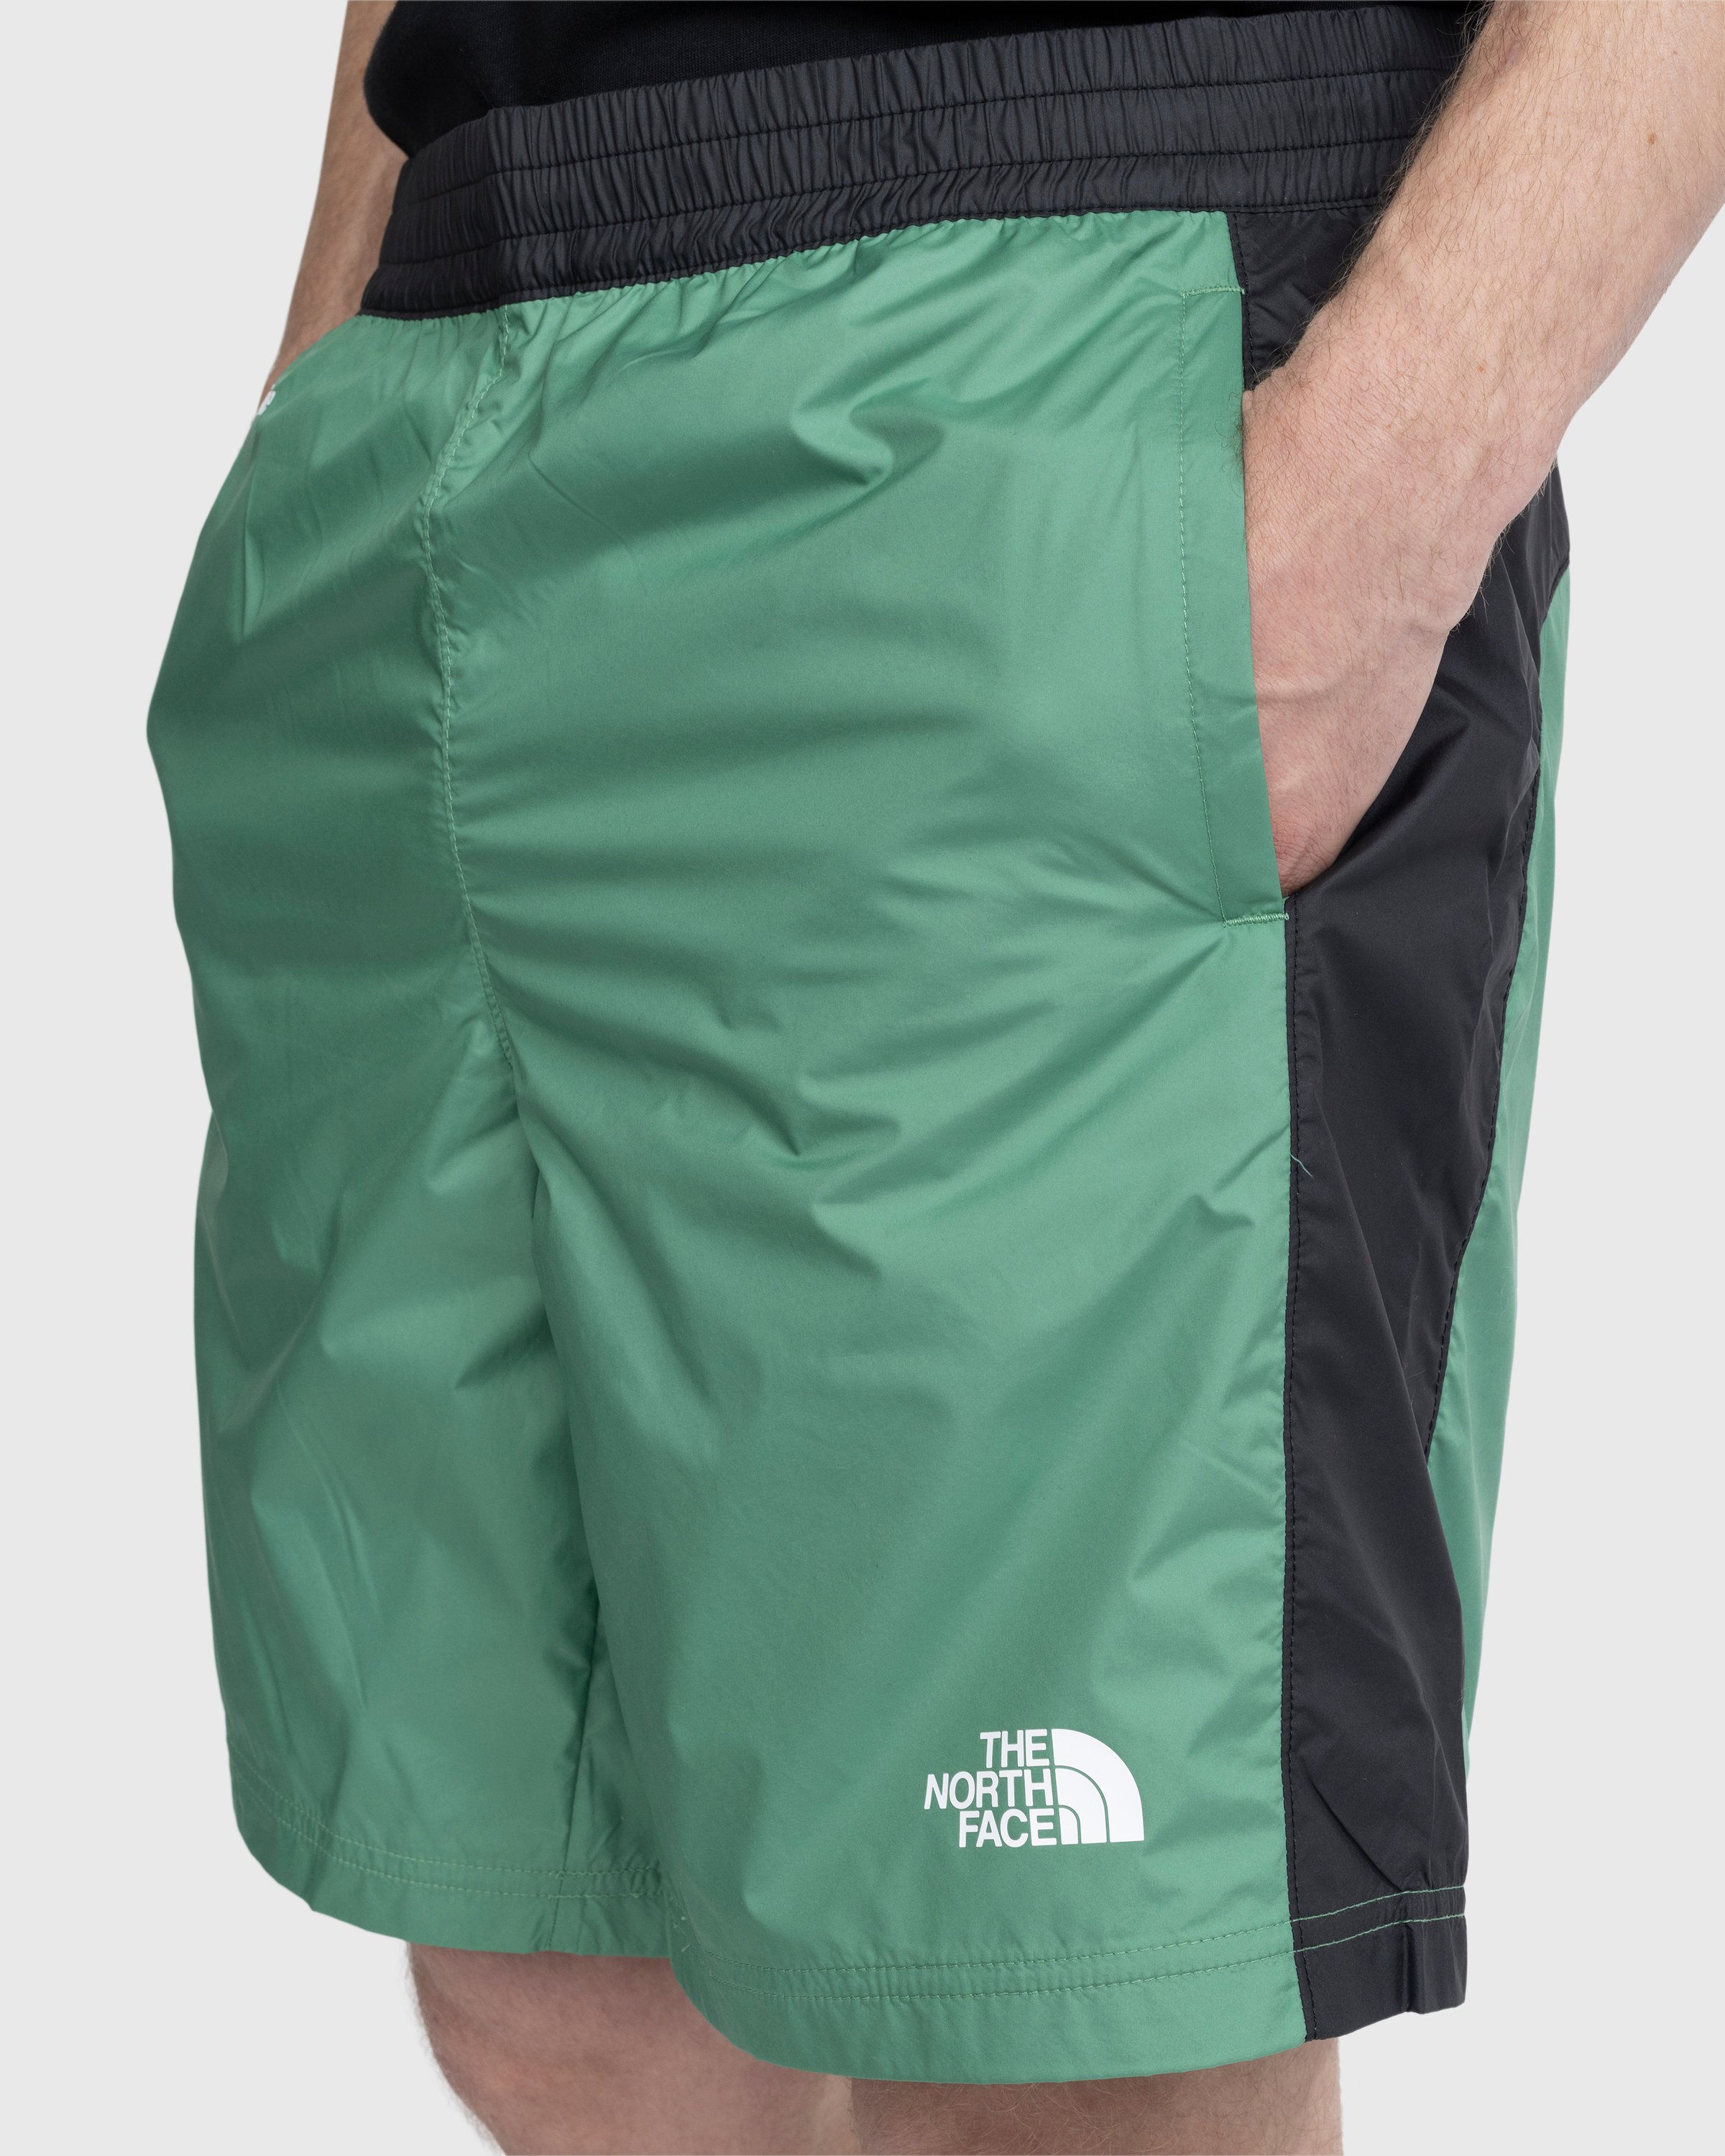 The North Face - Hydrenaline Short Deep Grass Green - Clothing - Green - Image 5